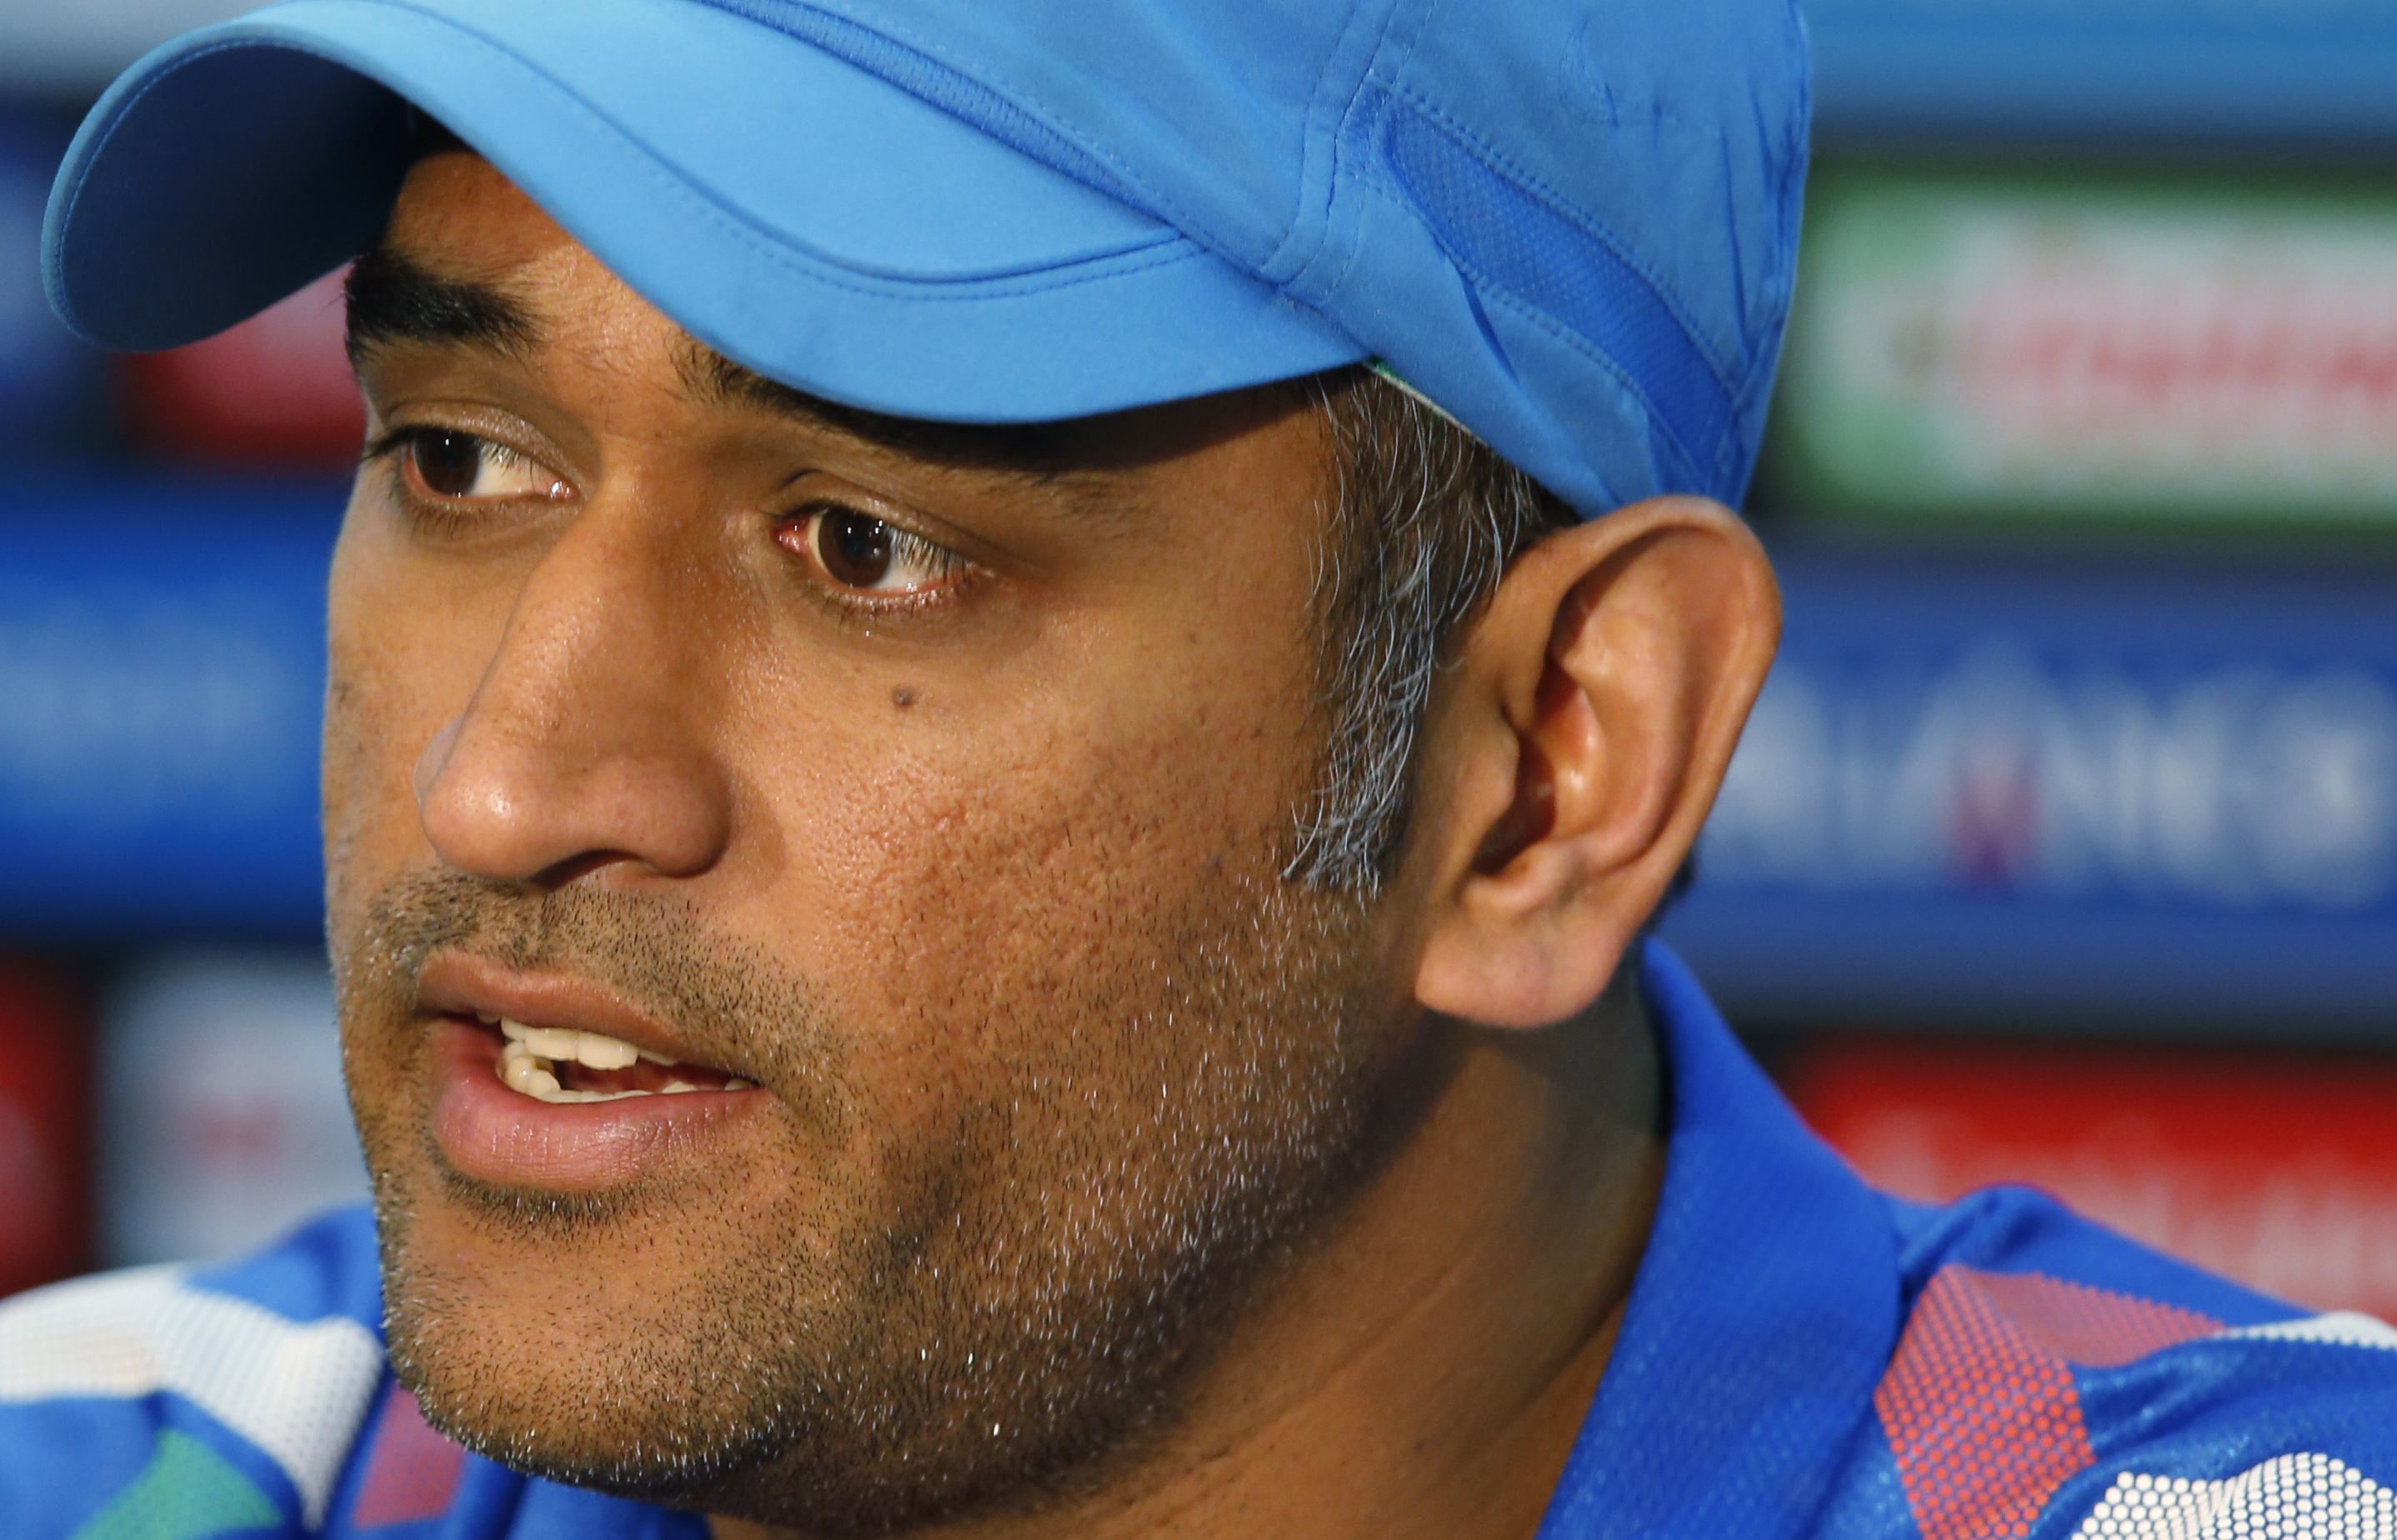 lovely dhoni beautiful face with press conference still mobile background free hd desktop wallpaper